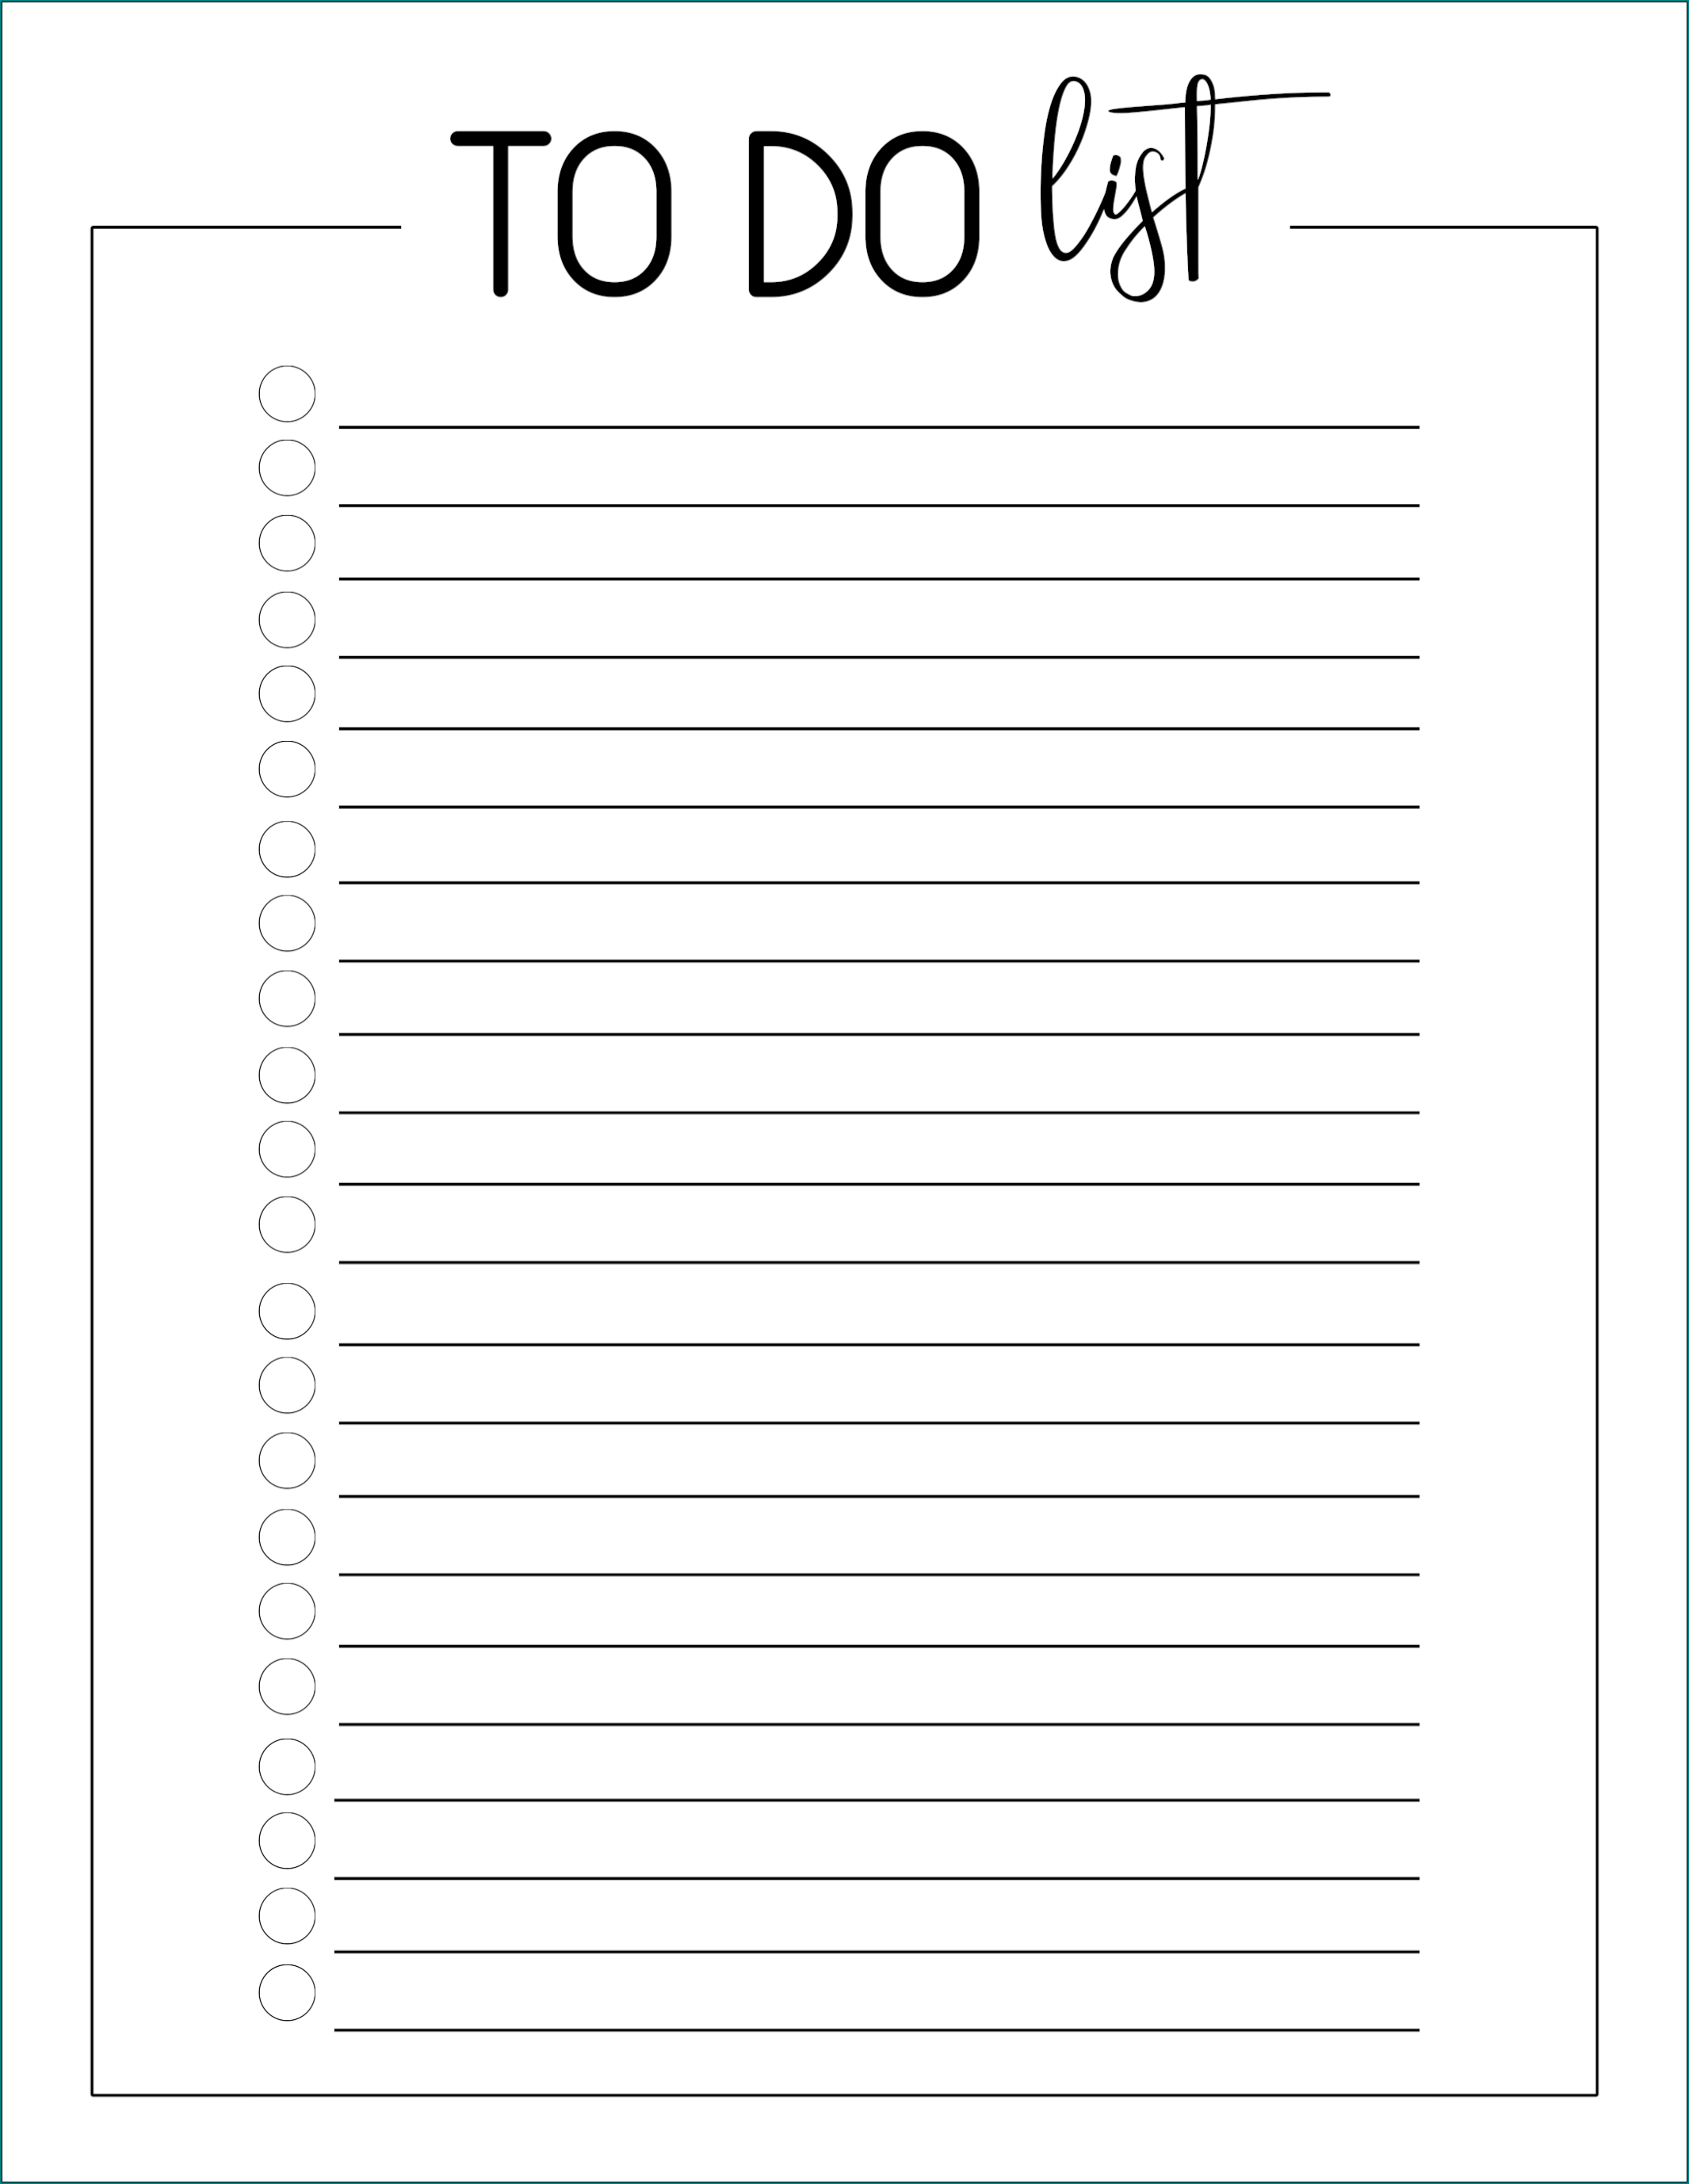 things-to-do-list-template-fresh-organization-templates-on-pinterest